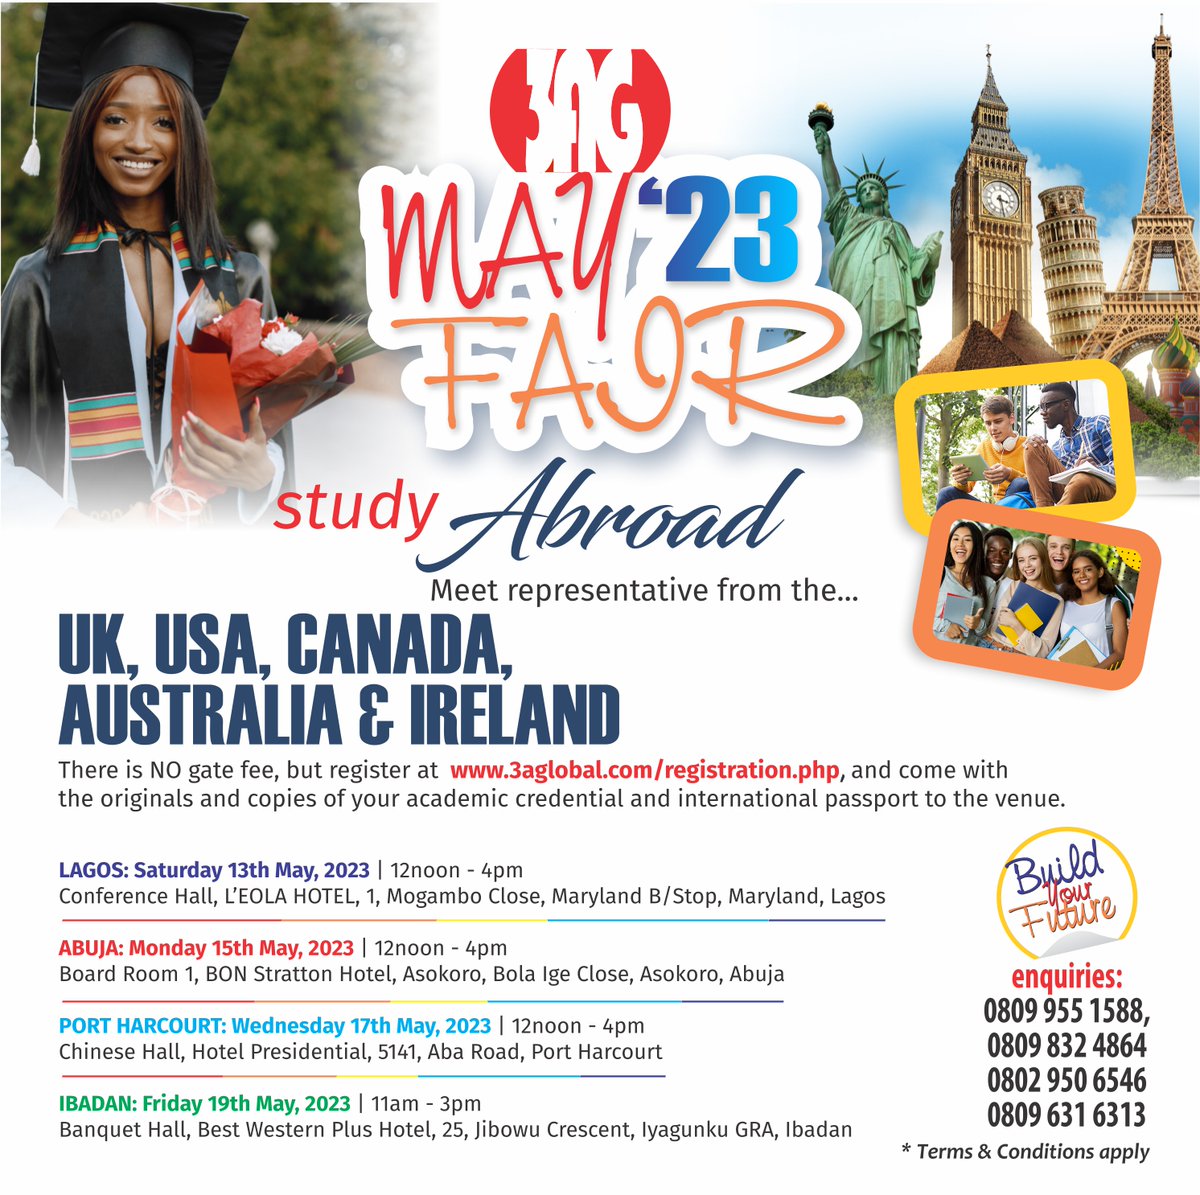 Attend the @3agglobal #StudyAbroad fair from 13th - 19th May 2023 in #Lagos #Abuja #PH and #Ibadan. Attendance is FREE but register @ 3aglobal.com/registration.p…. 

Don't miss this opportunity to STUDY and LIVE in the #StudyinUK #StudyUSA #StudyAustralia #StudyCanada #StudyIreland